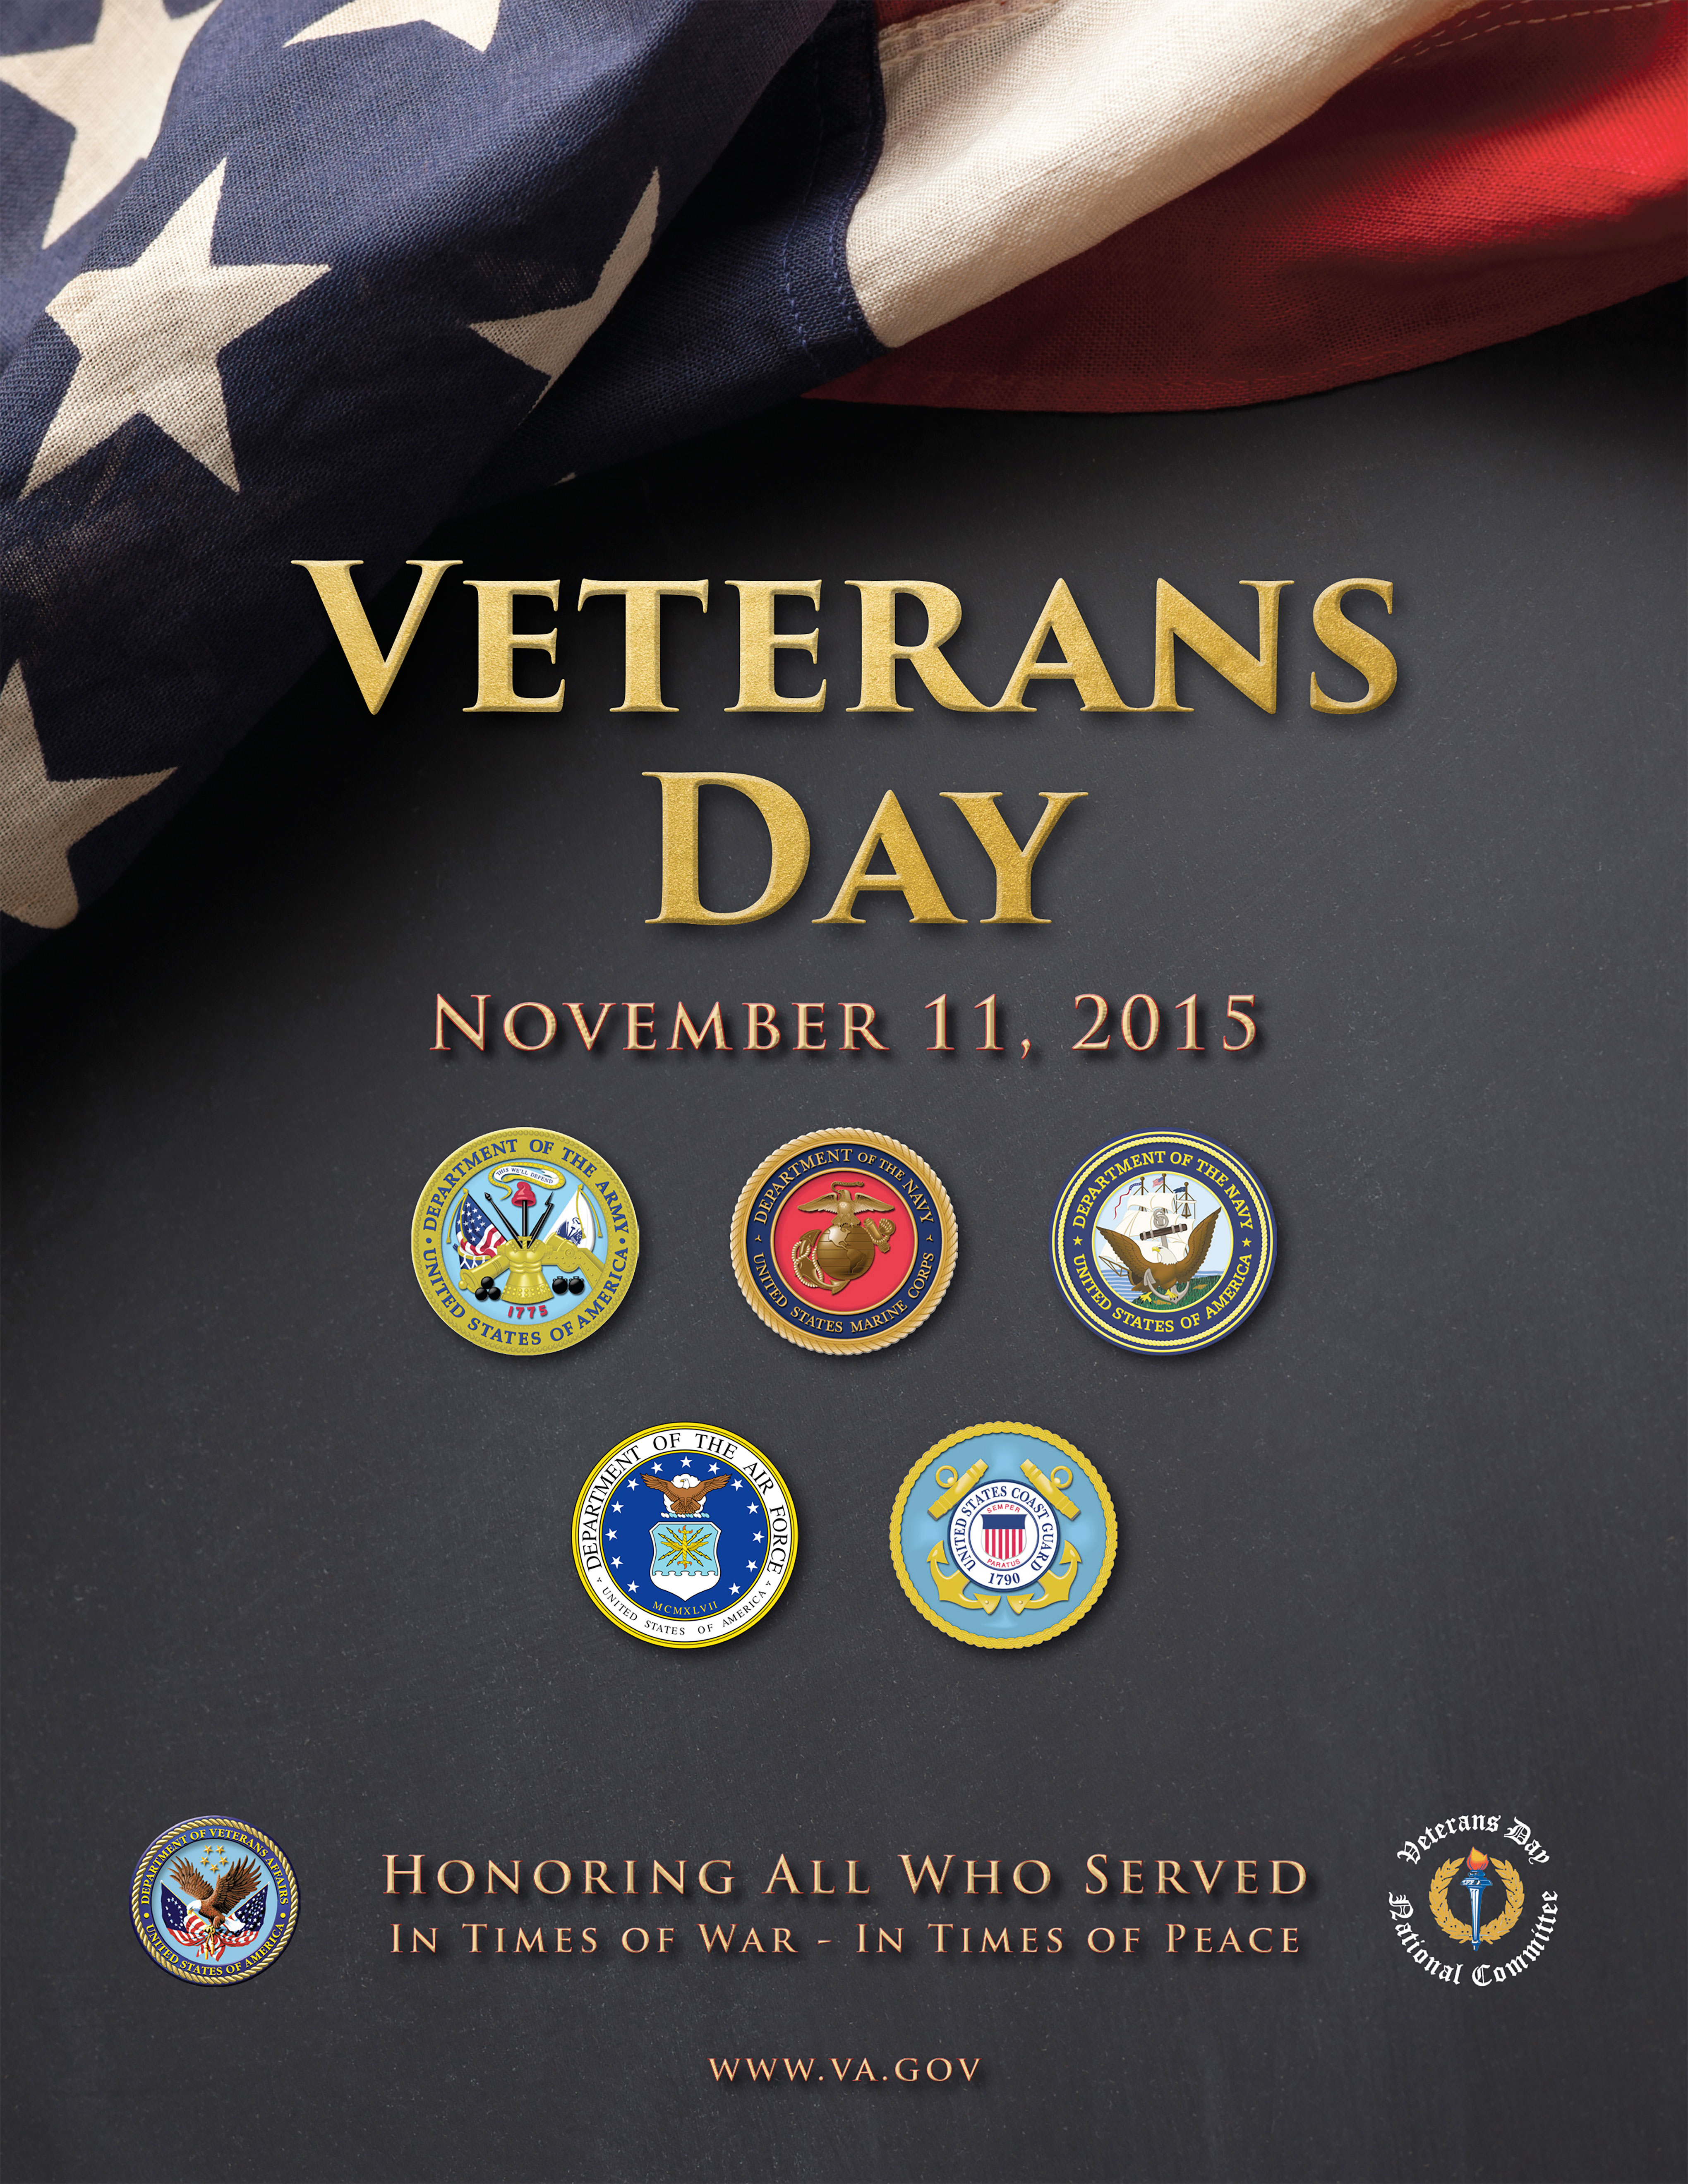 Veterans Day Poster Gallery Office of Public and Intergovernmental